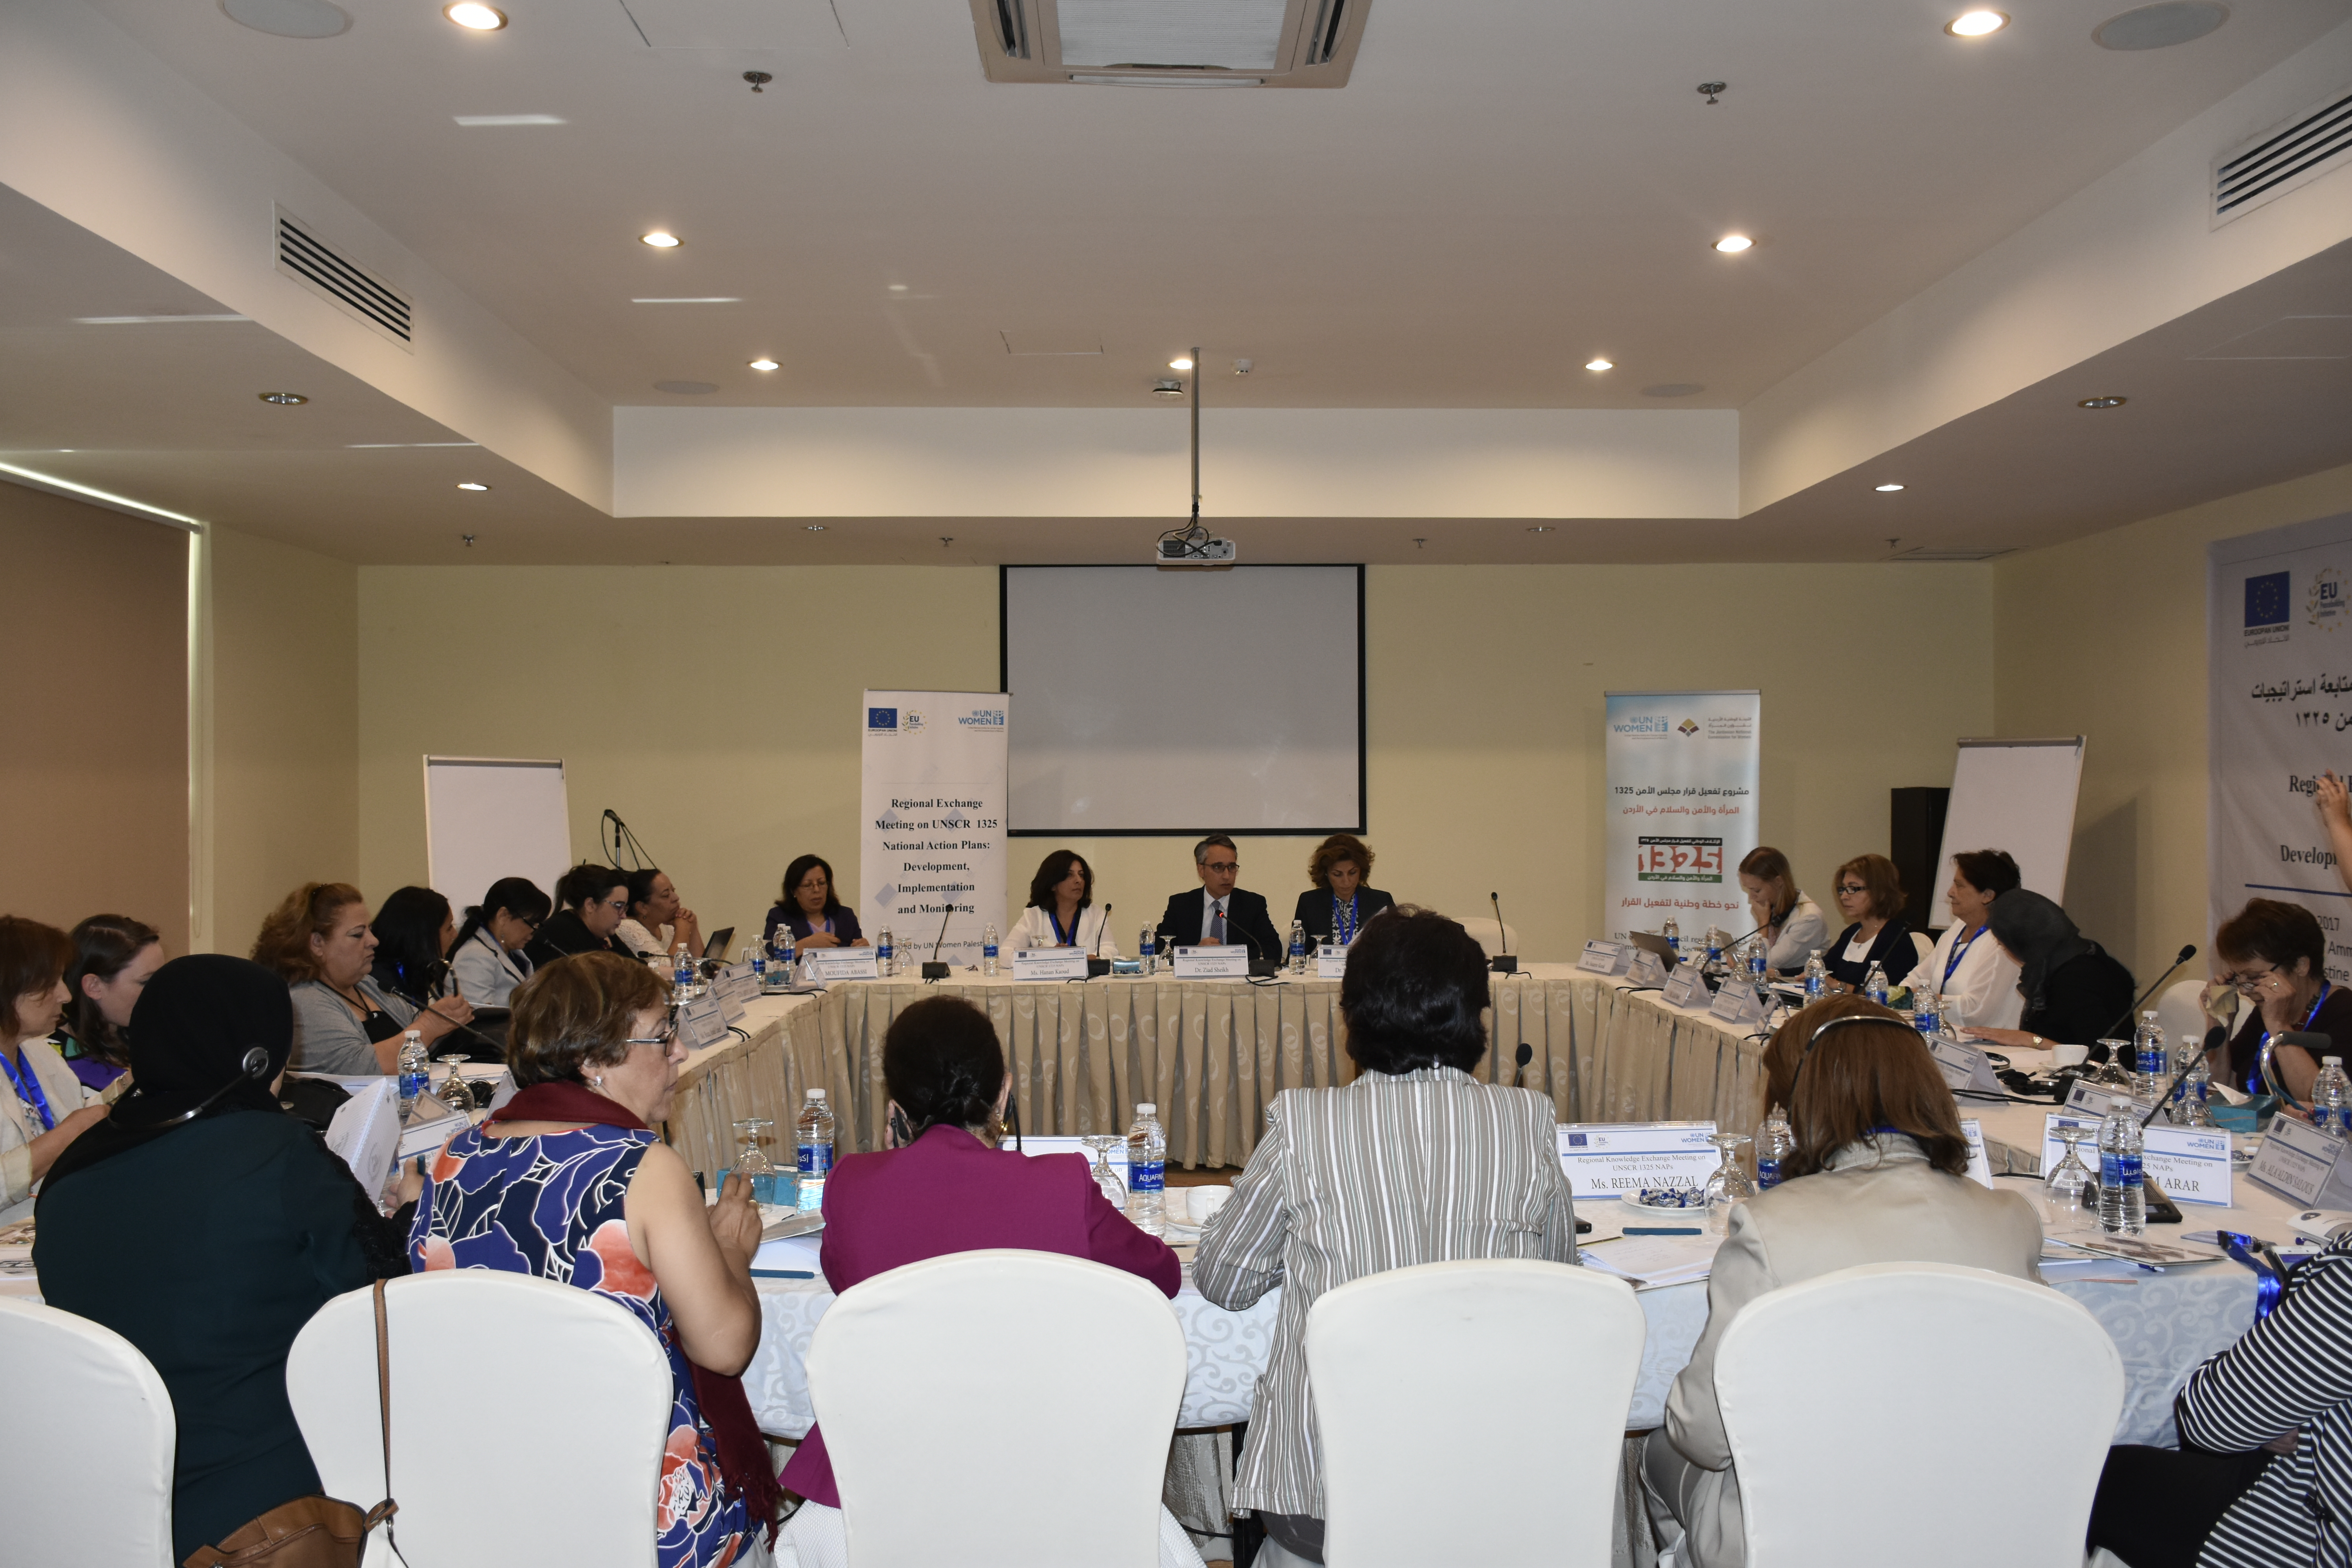 A regional meeting on advancing the implementation of National Action Plans on UNSCR 1325